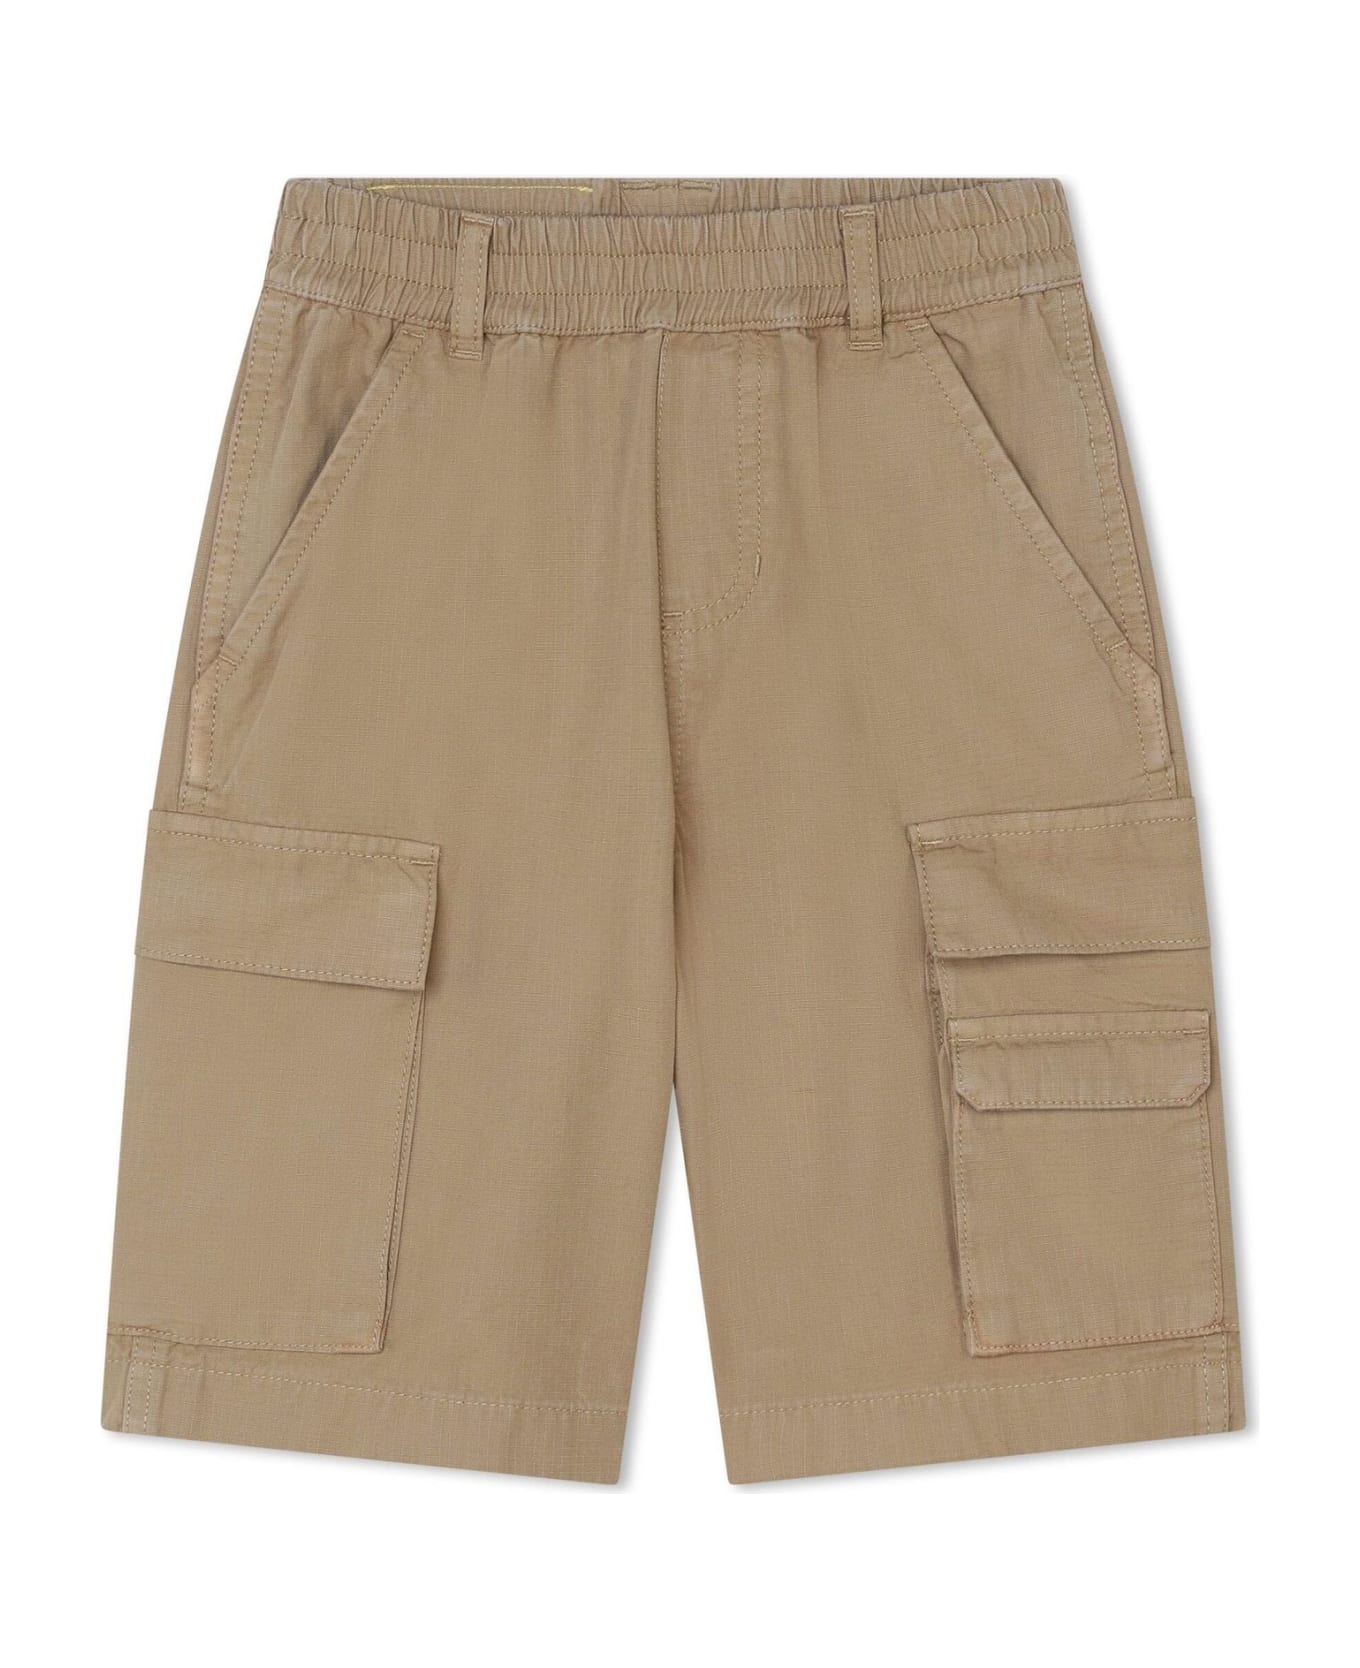 Marc Jacobs Shorts Brown - Brown ボトムス